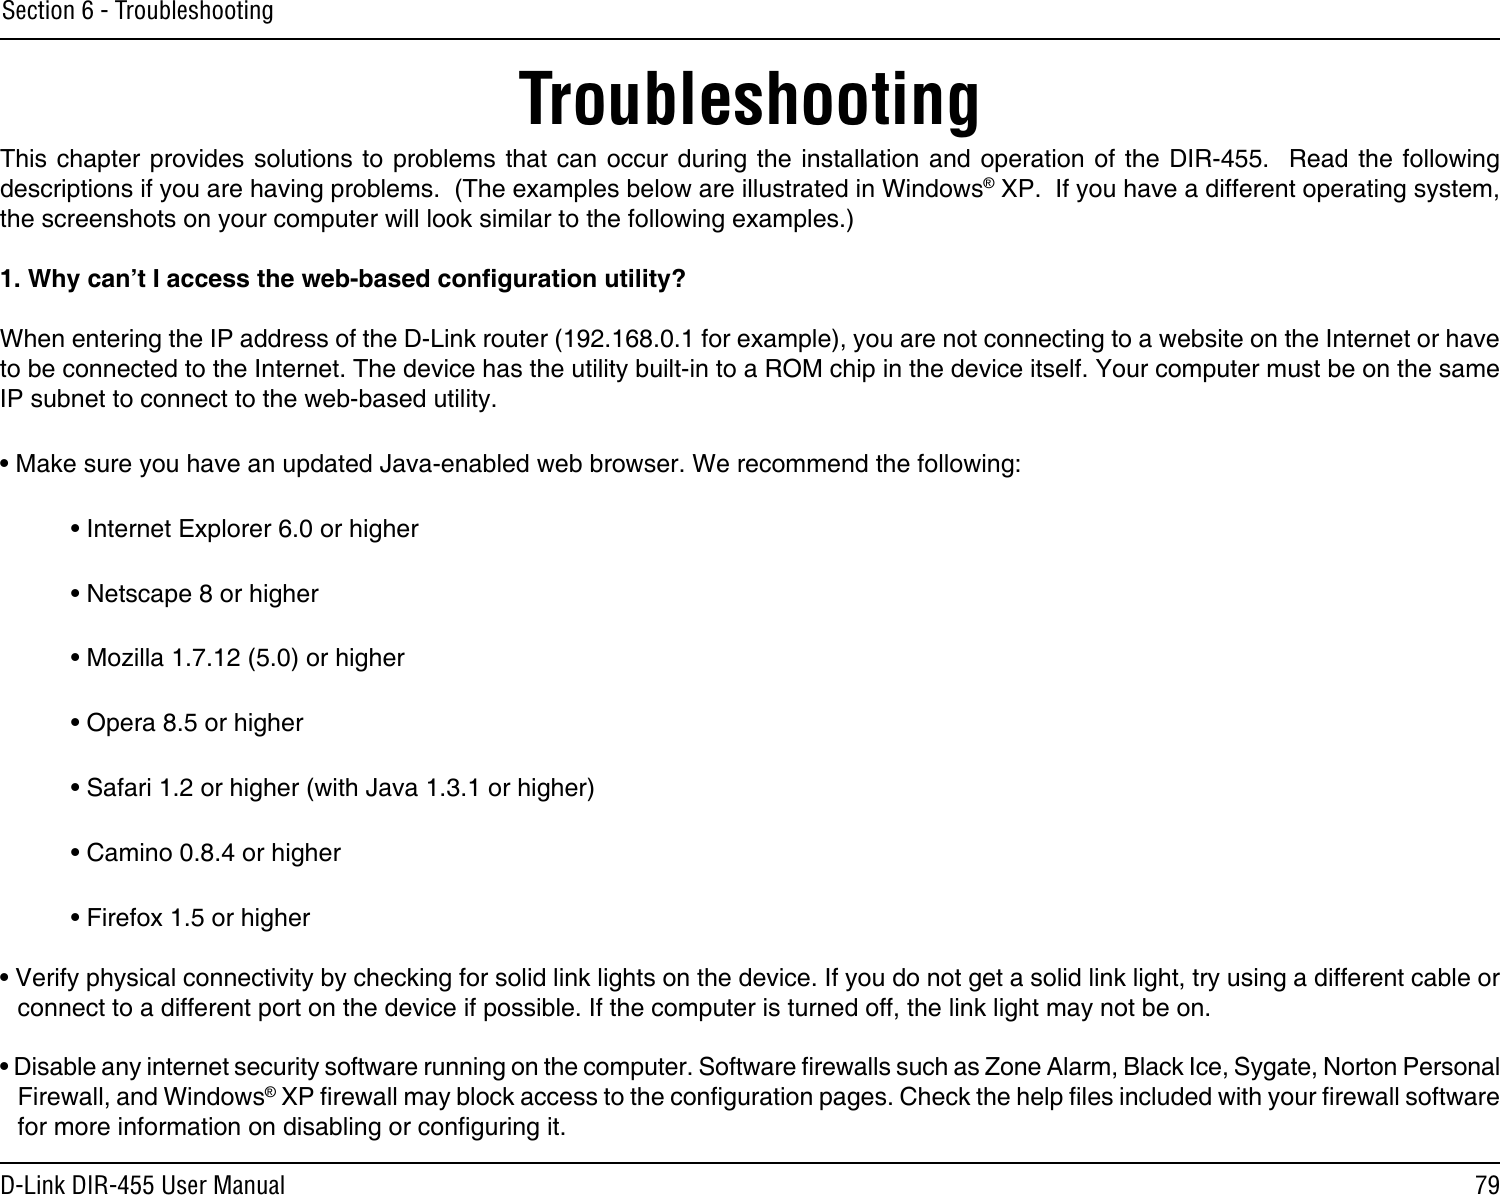 79D-Link DIR-455 User ManualSection 6 - TroubleshootingTroubleshootingThis chapter provides  solutions  to problems that can occur  during the installation and operation  of the DIR-455.  Read  the  following descriptions if you are having problems.  (The examples below are illustrated in Windows® XP.  If you have a different operating system, the screenshots on your computer will look similar to the following examples.)1. Why can’t I access the web-based conguration utility?When entering the IP address of the D-Link router (192.168.0.1 for example), you are not connecting to a website on the Internet or have to be connected to the Internet. The device has the utility built-in to a ROM chip in the device itself. Your computer must be on the same IP subnet to connect to the web-based utility. • Make sure you have an updated Java-enabled web browser. We recommend the following: • Internet Explorer 6.0 or higher • Netscape 8 or higher • Mozilla 1.7.12 (5.0) or higher • Opera 8.5 or higher • Safari 1.2 or higher (with Java 1.3.1 or higher) • Camino 0.8.4 or higher • Firefox 1.5 or higher • Verify physical connectivity by checking for solid link lights on the device. If you do not get a solid link light, try using a different cable or connect to a different port on the device if possible. If the computer is turned off, the link light may not be on.• Disable any internet security software running on the computer. Software rewalls such as Zone Alarm, Black Ice, Sygate, Norton Personal Firewall, and Windows® XP rewall may block access to the conguration pages. Check the help les included with your rewall software for more information on disabling or conguring it.